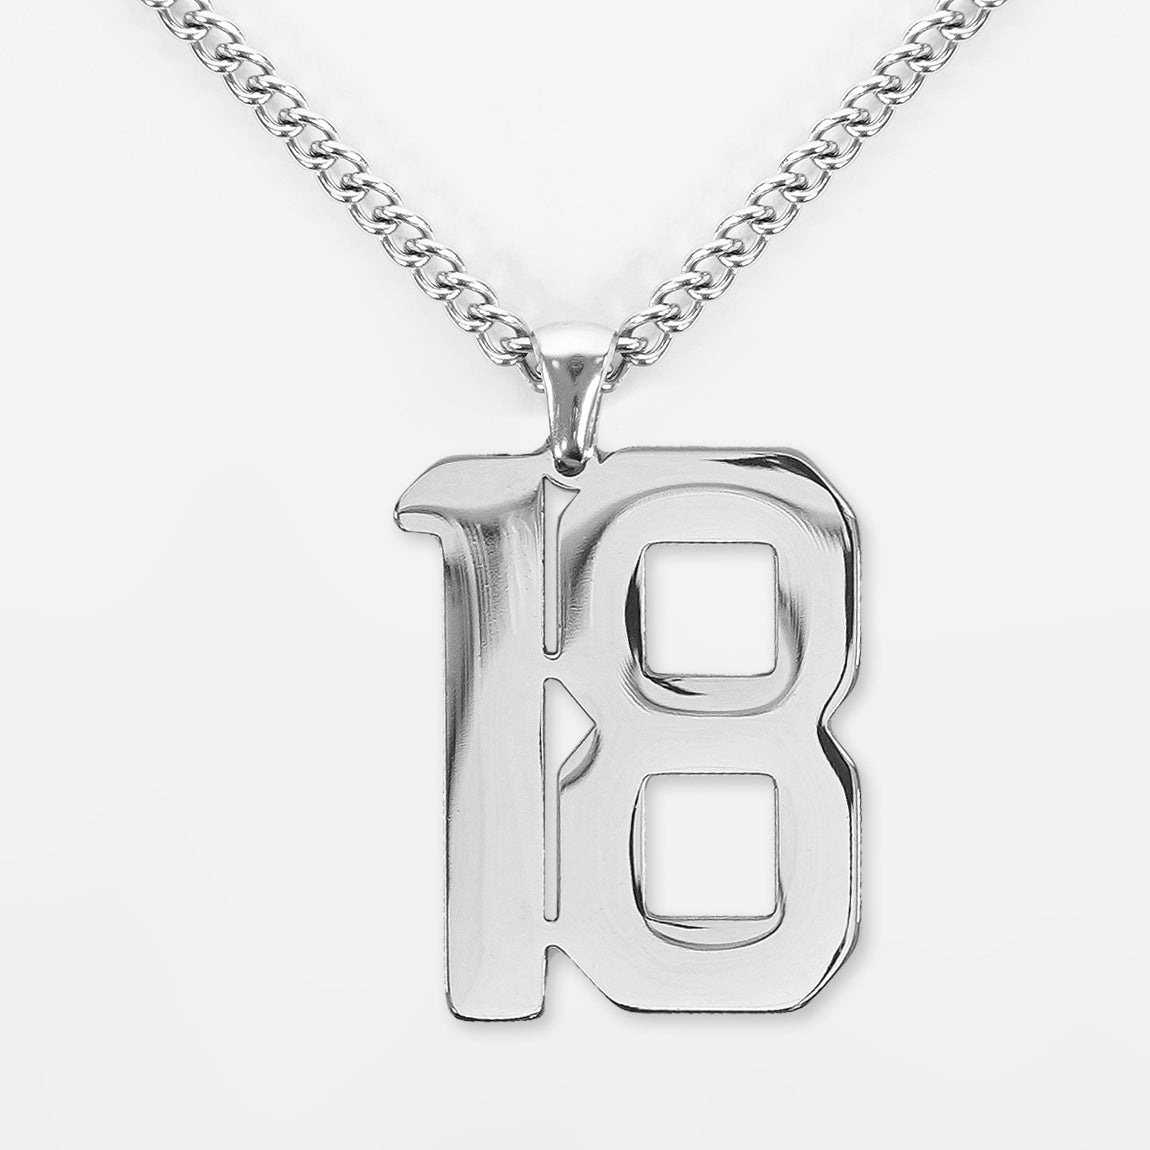 18 Number Pendant with Chain Necklace - Stainless Steel